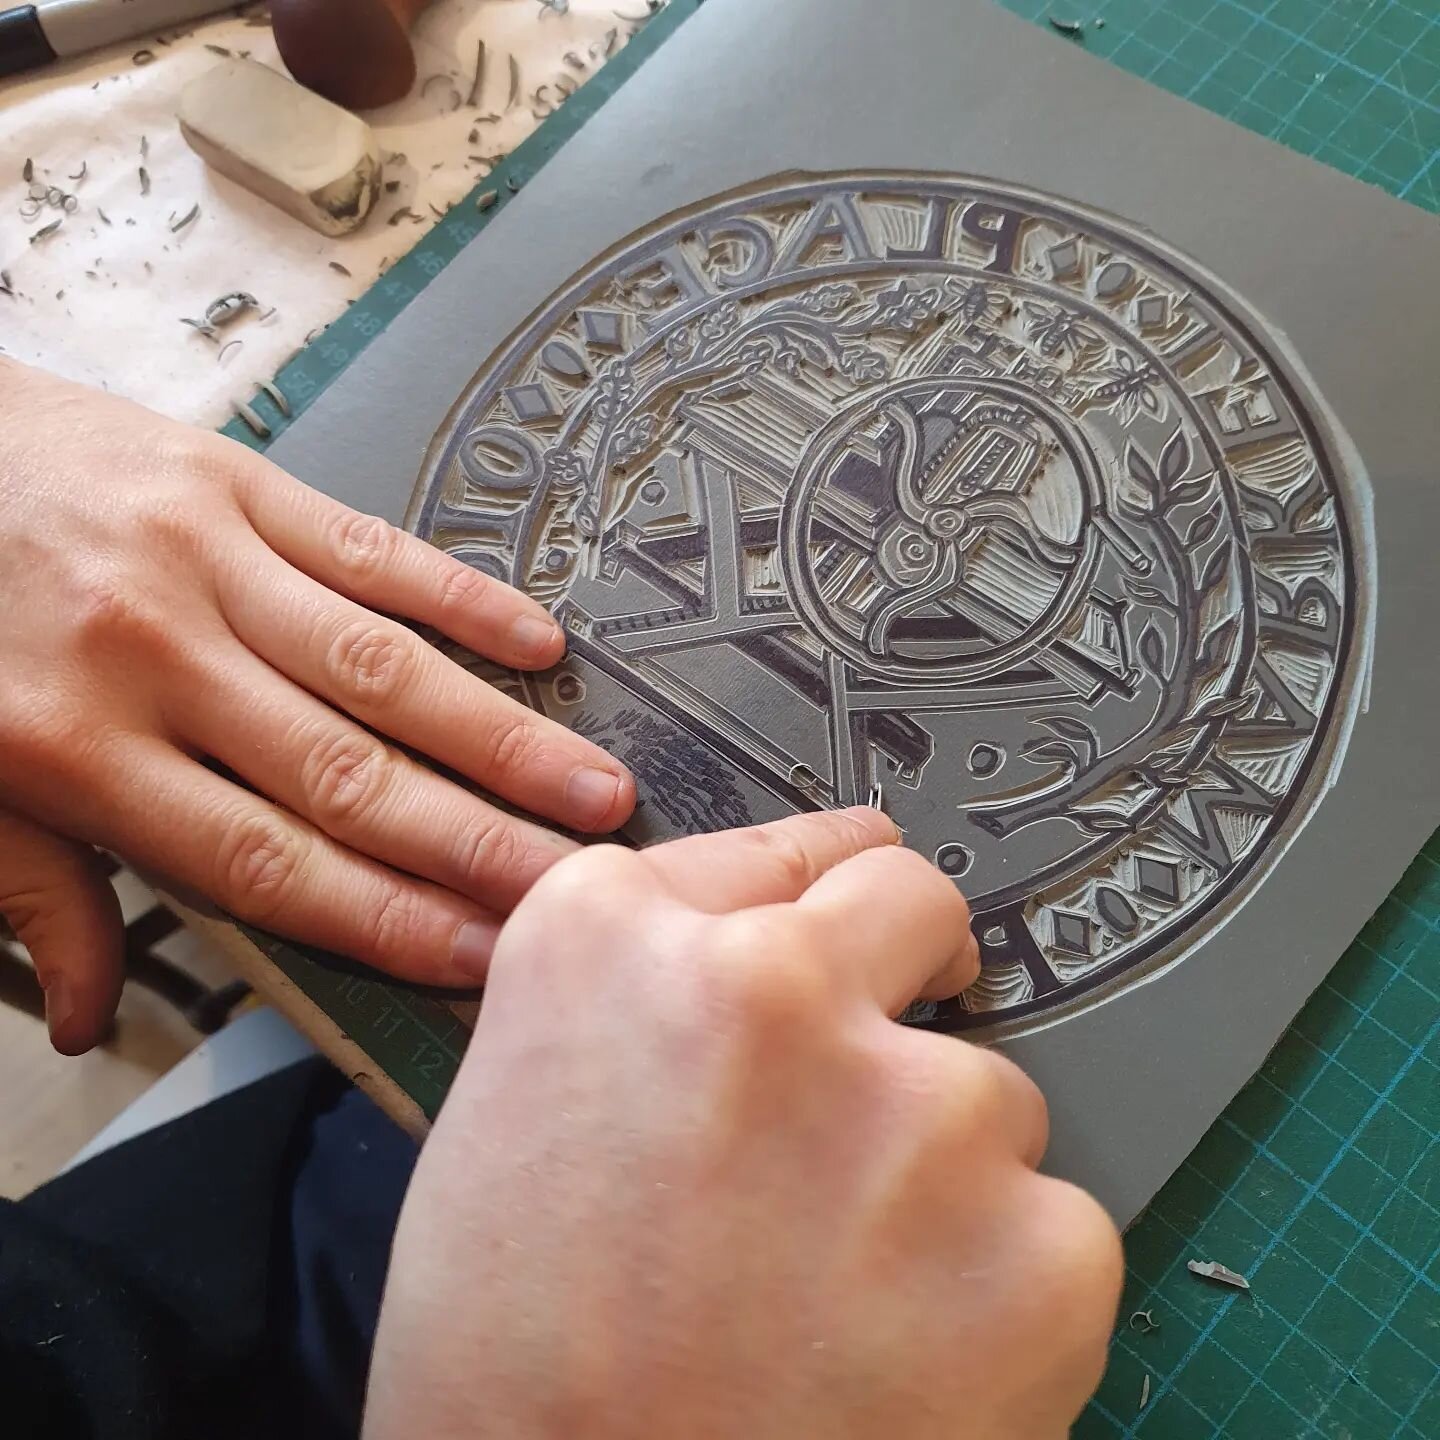 We open next Saturday the 17th! @jackfawdrytatham is busy getting our lino cut logo ready for the website, that will also launch on the 17th. 

#contemporaryprintmaking